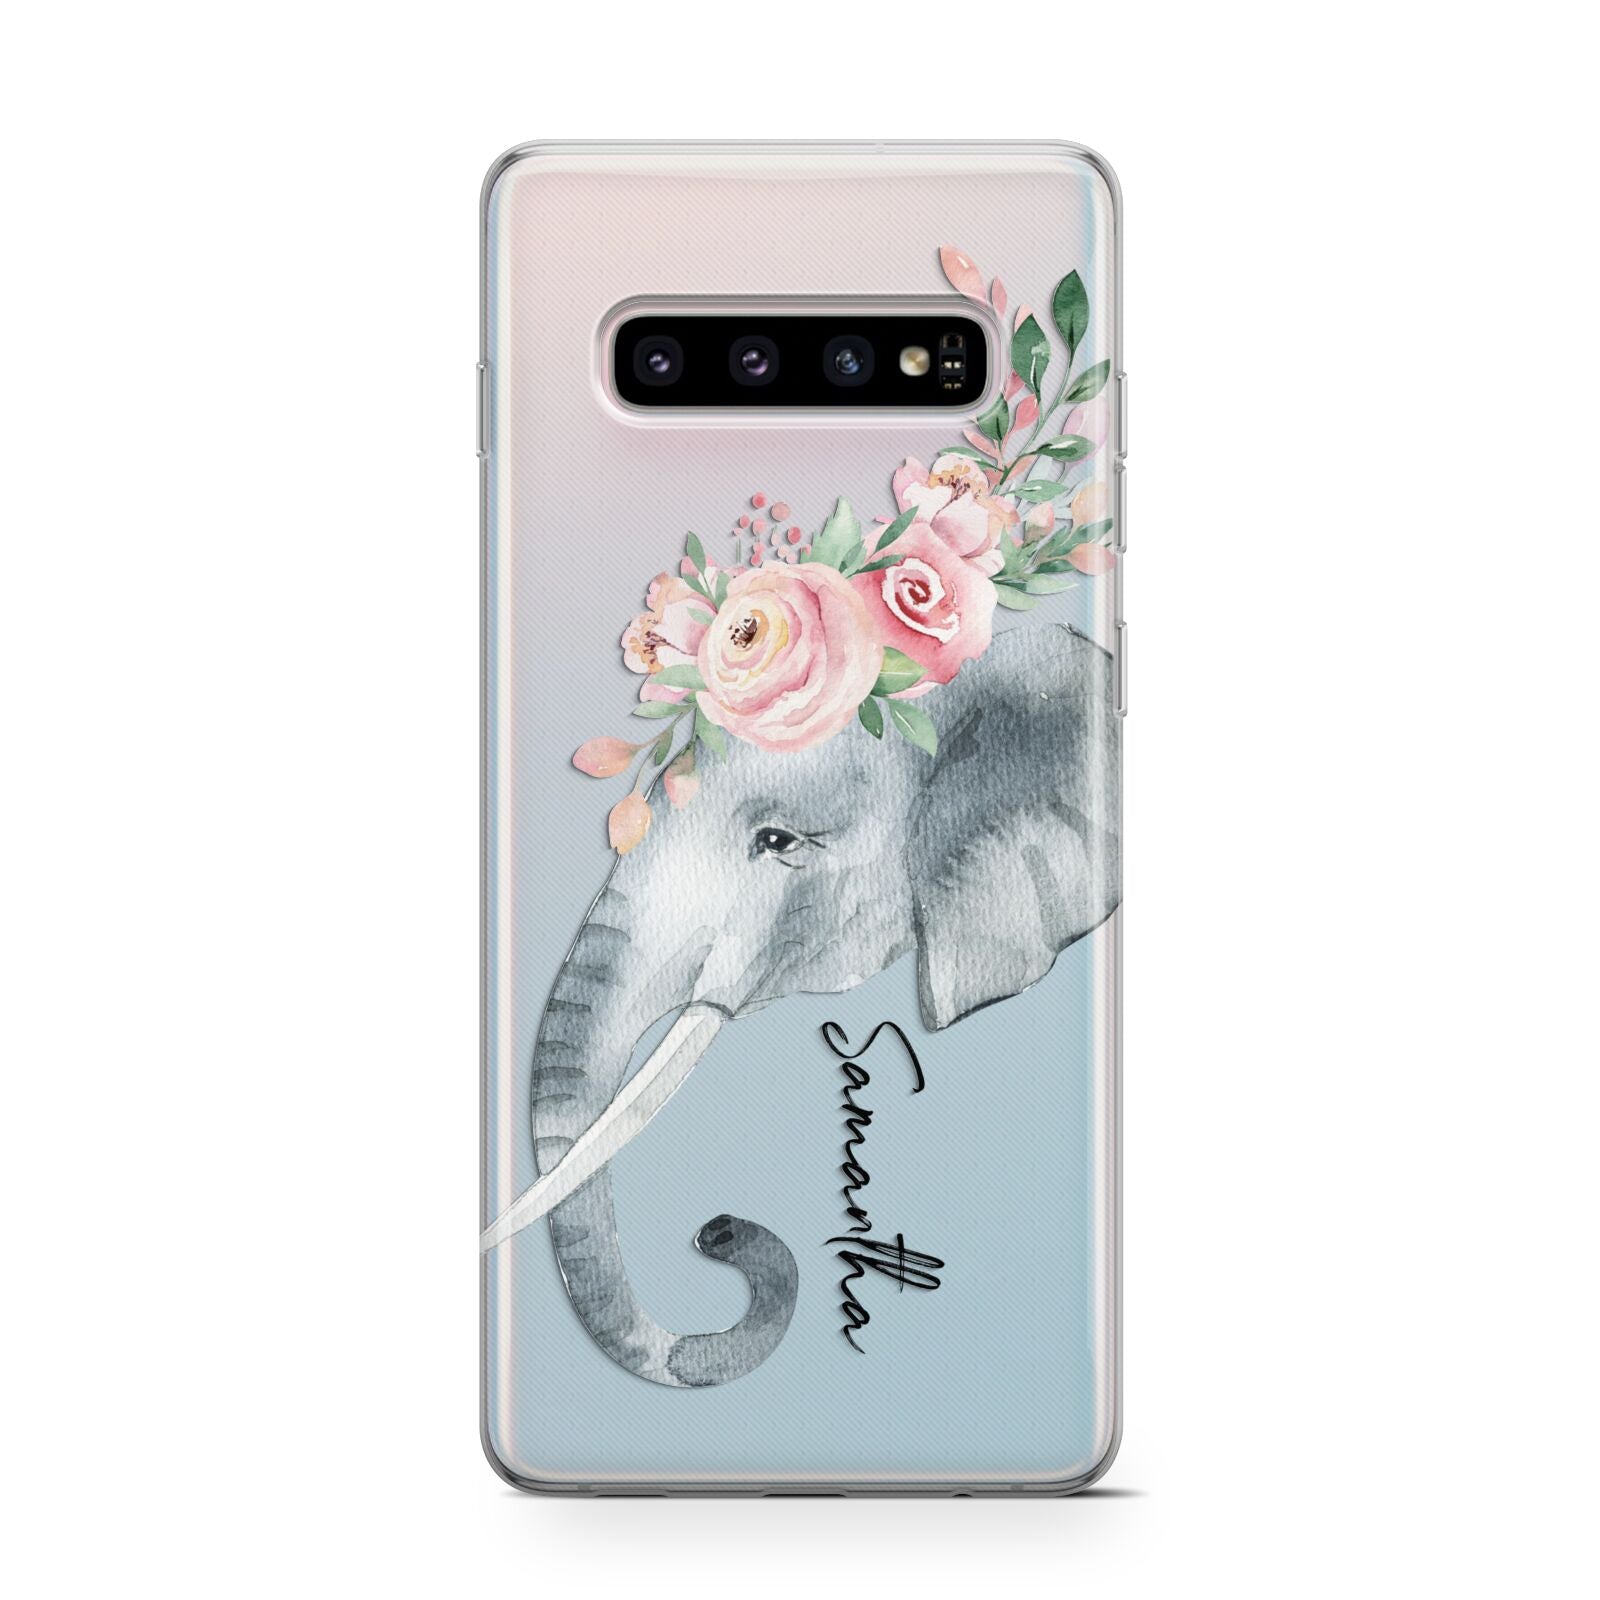 Personalised Elephant Protective Samsung Galaxy Case